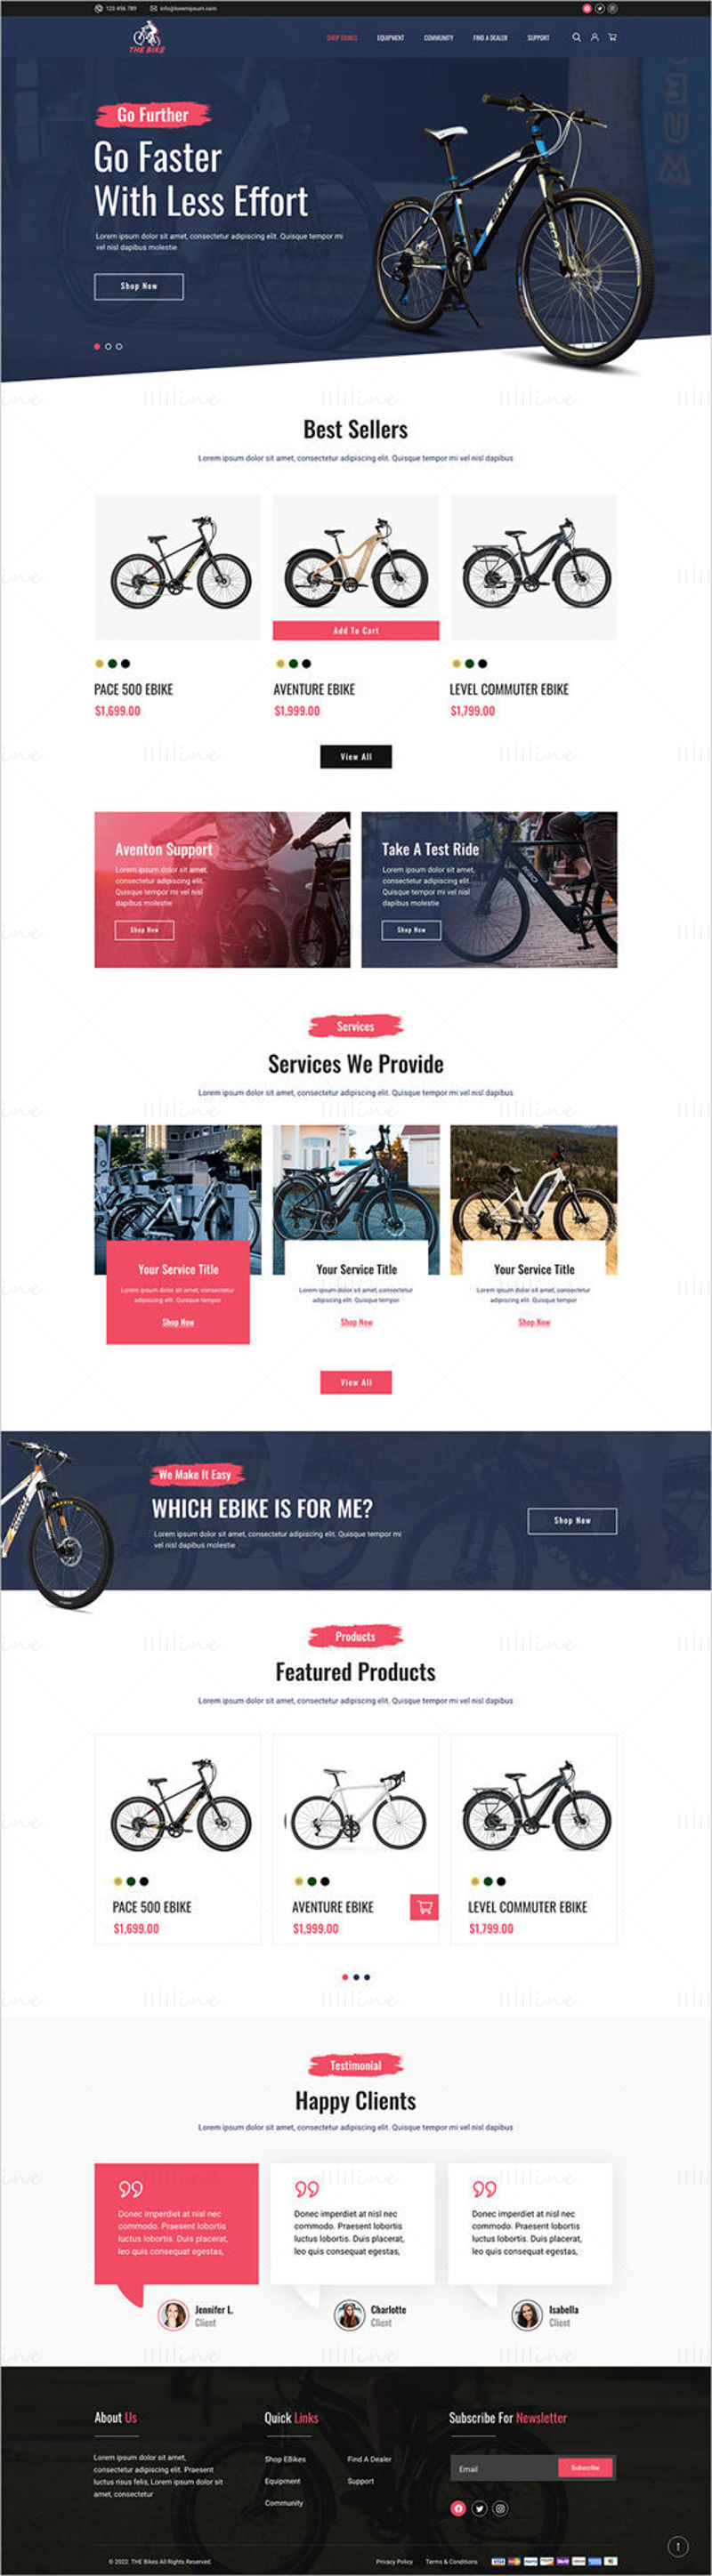 The Bike Company Website UI Landing Page Template Designed in Adobe XD